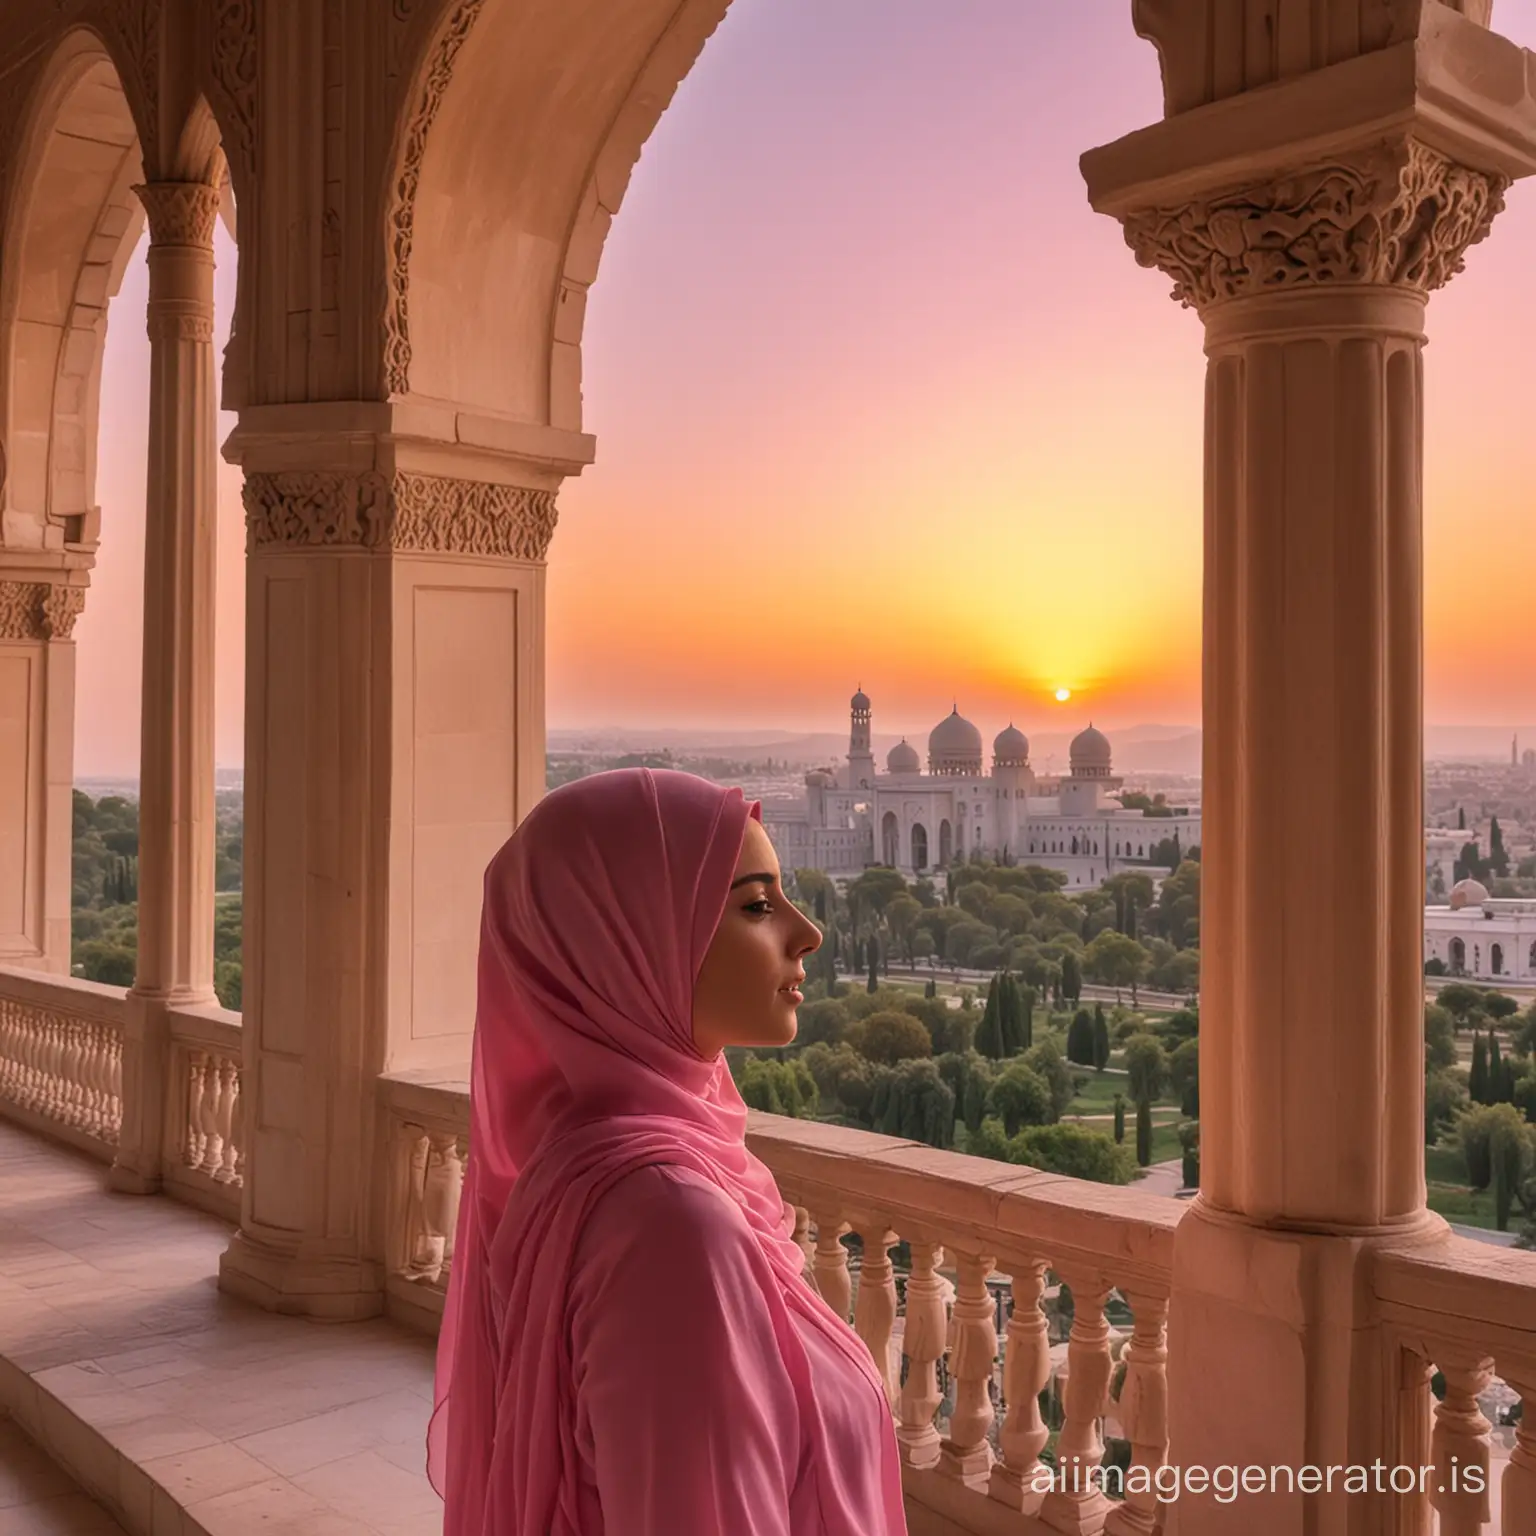 Lady with pink hijab in a palace watching sunset